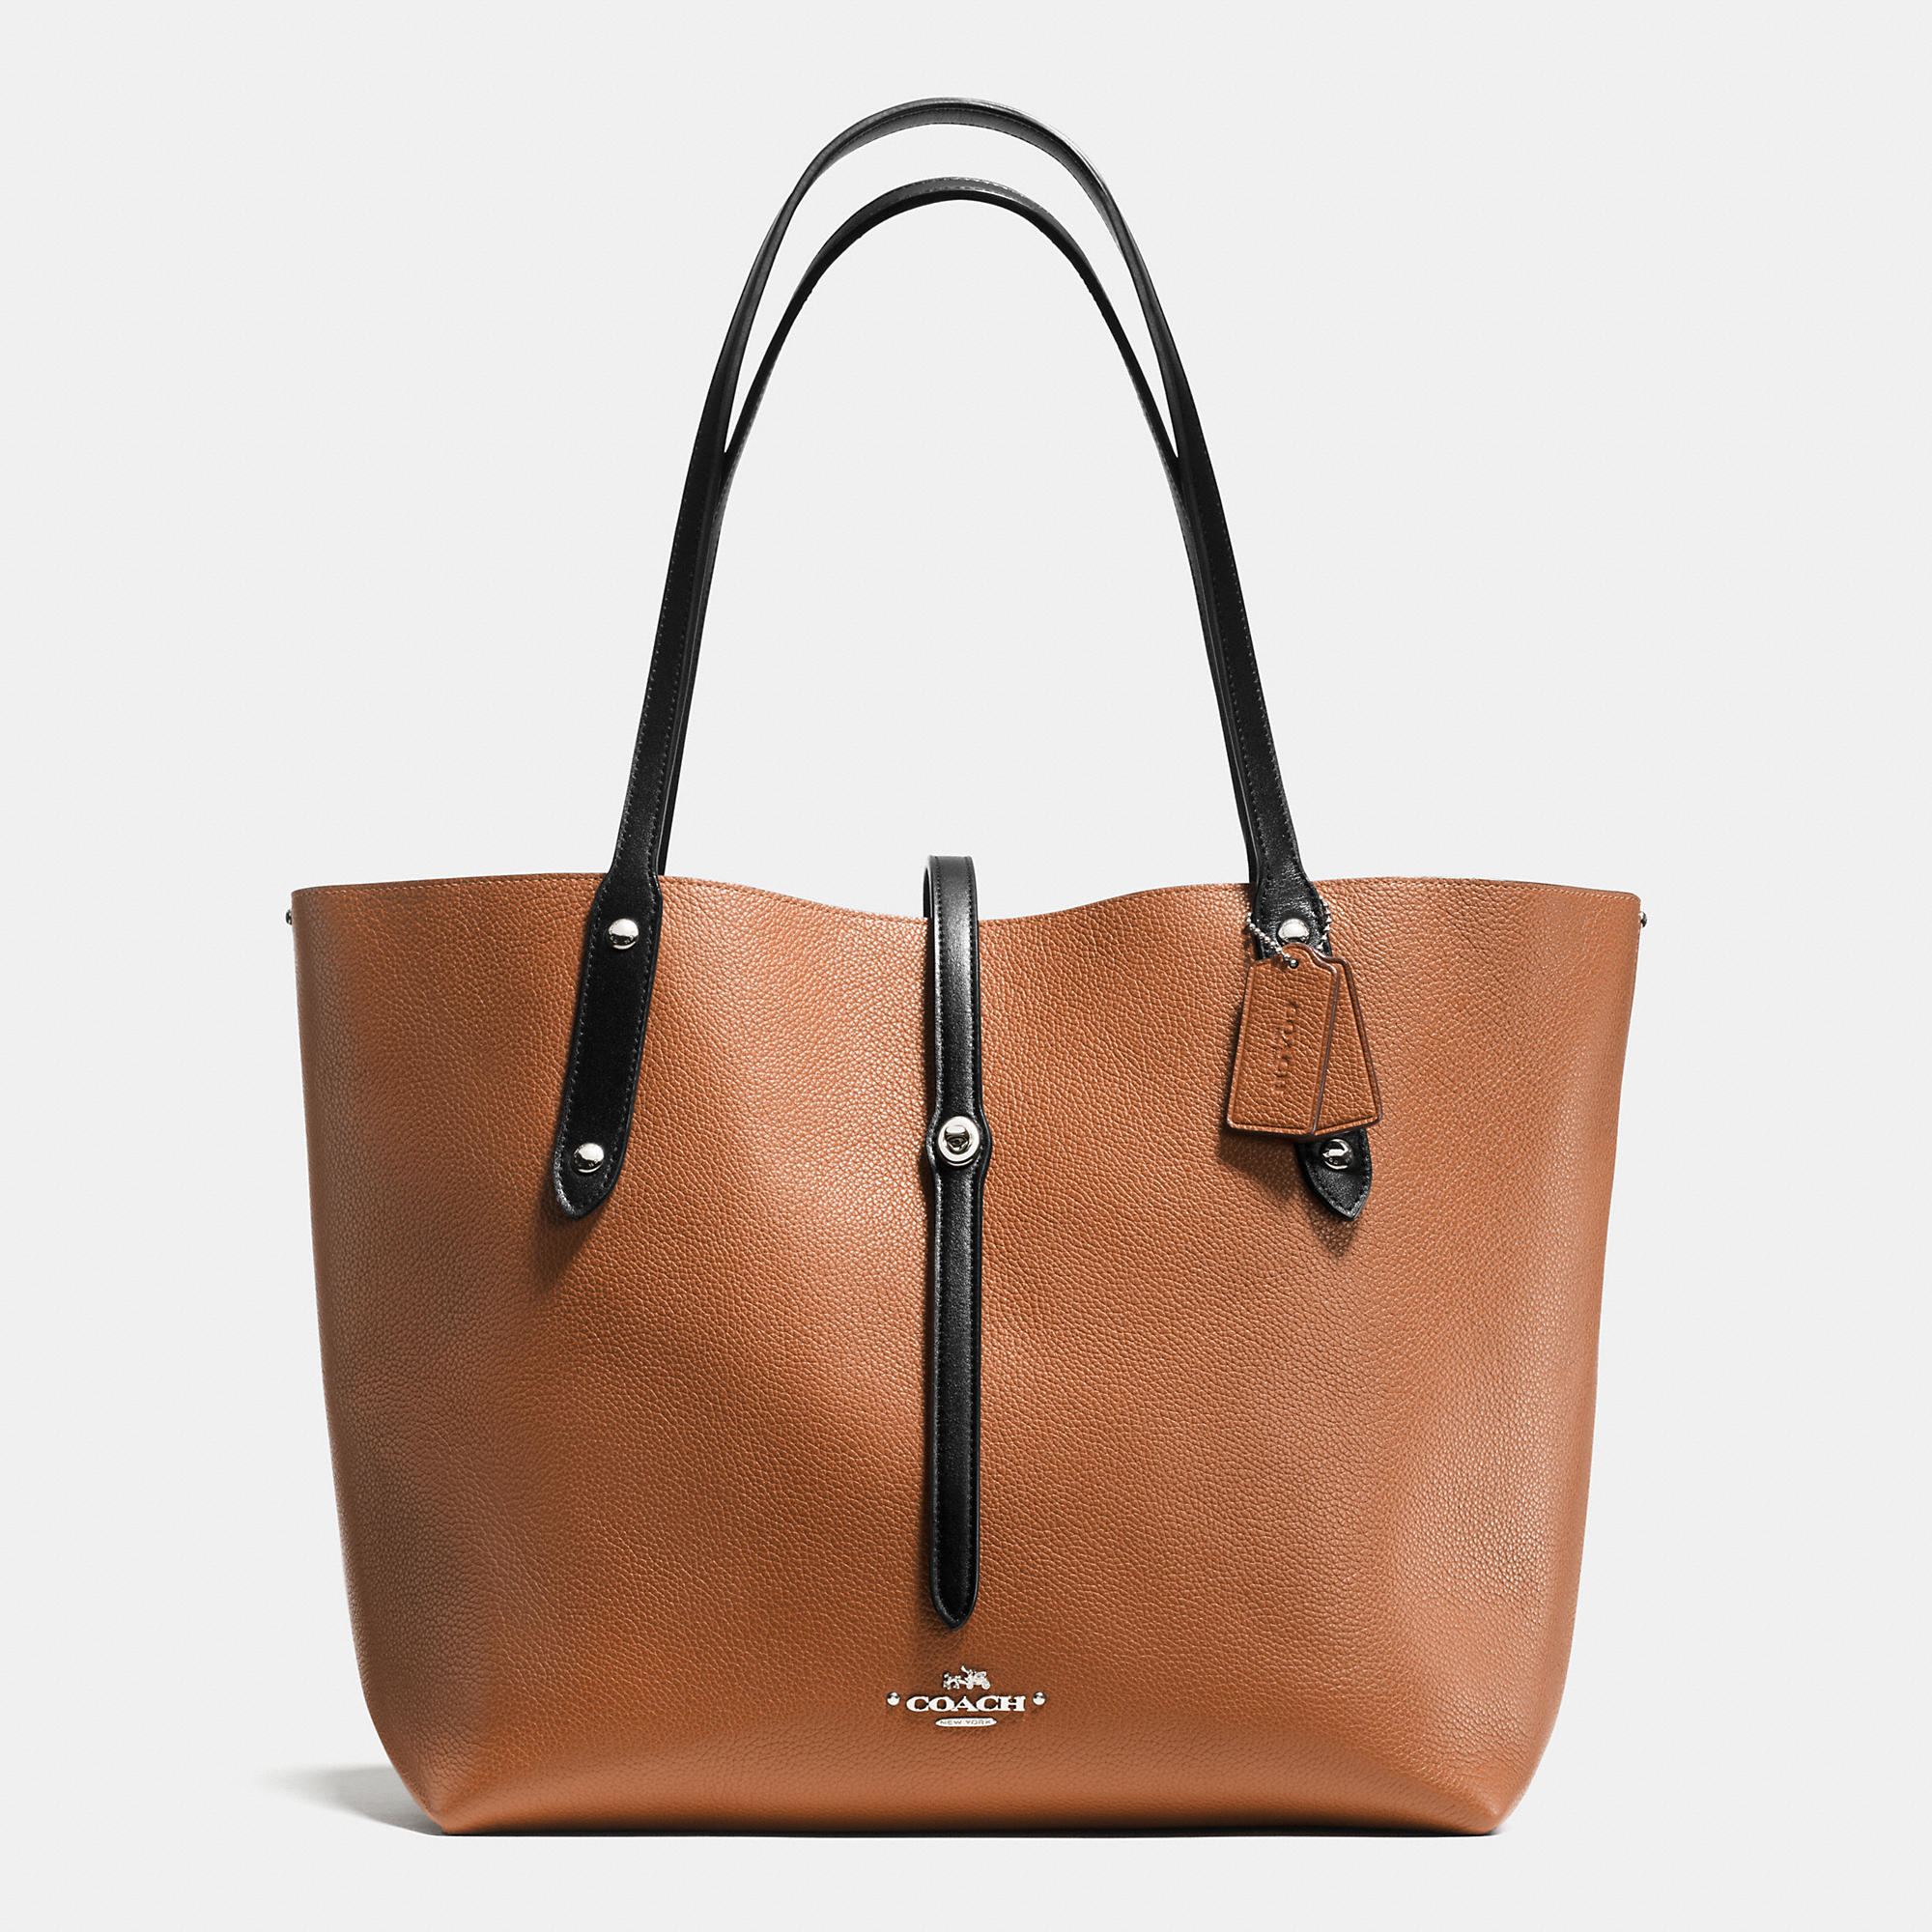 COACH Market Tote In Refined Pebble Leather in Metallic | Lyst